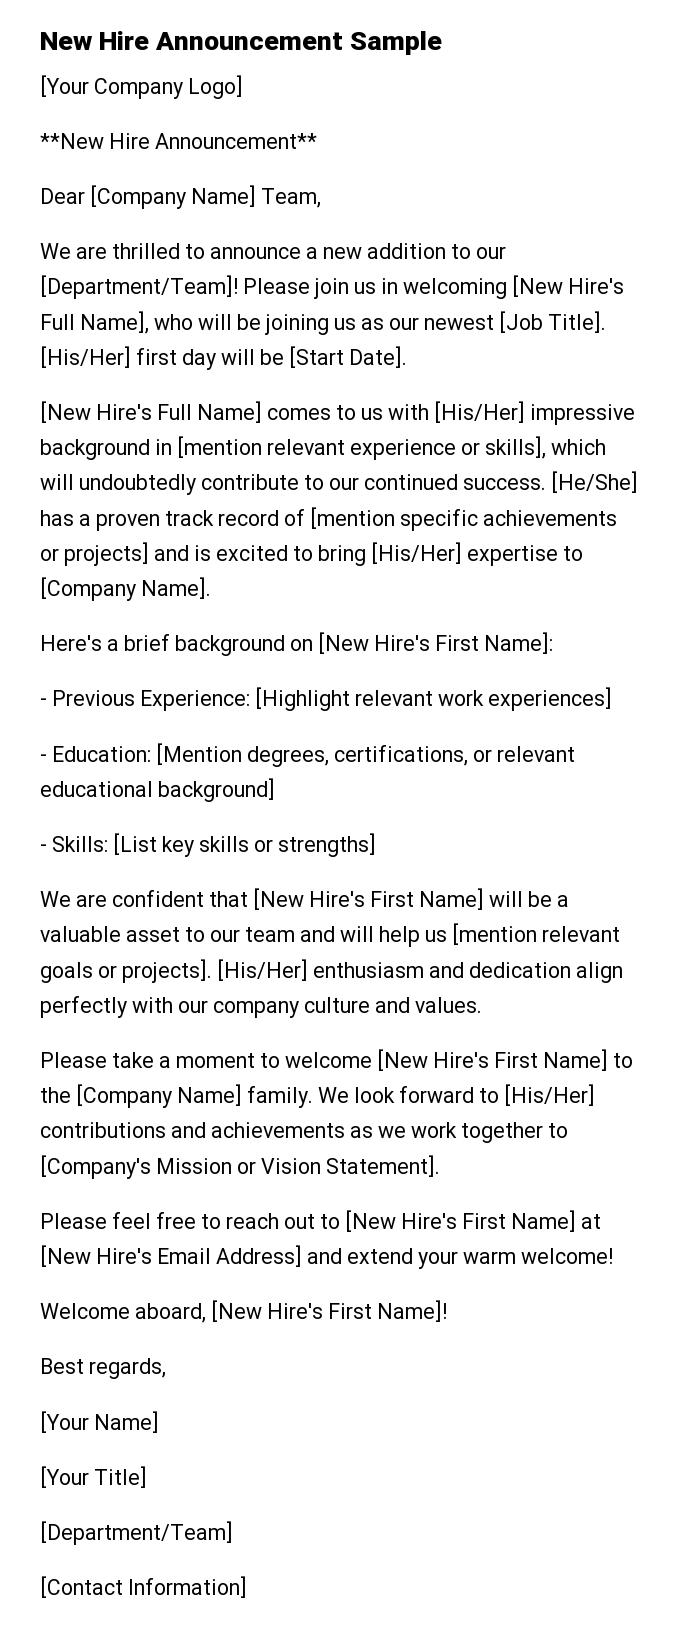 New Hire Announcement Sample